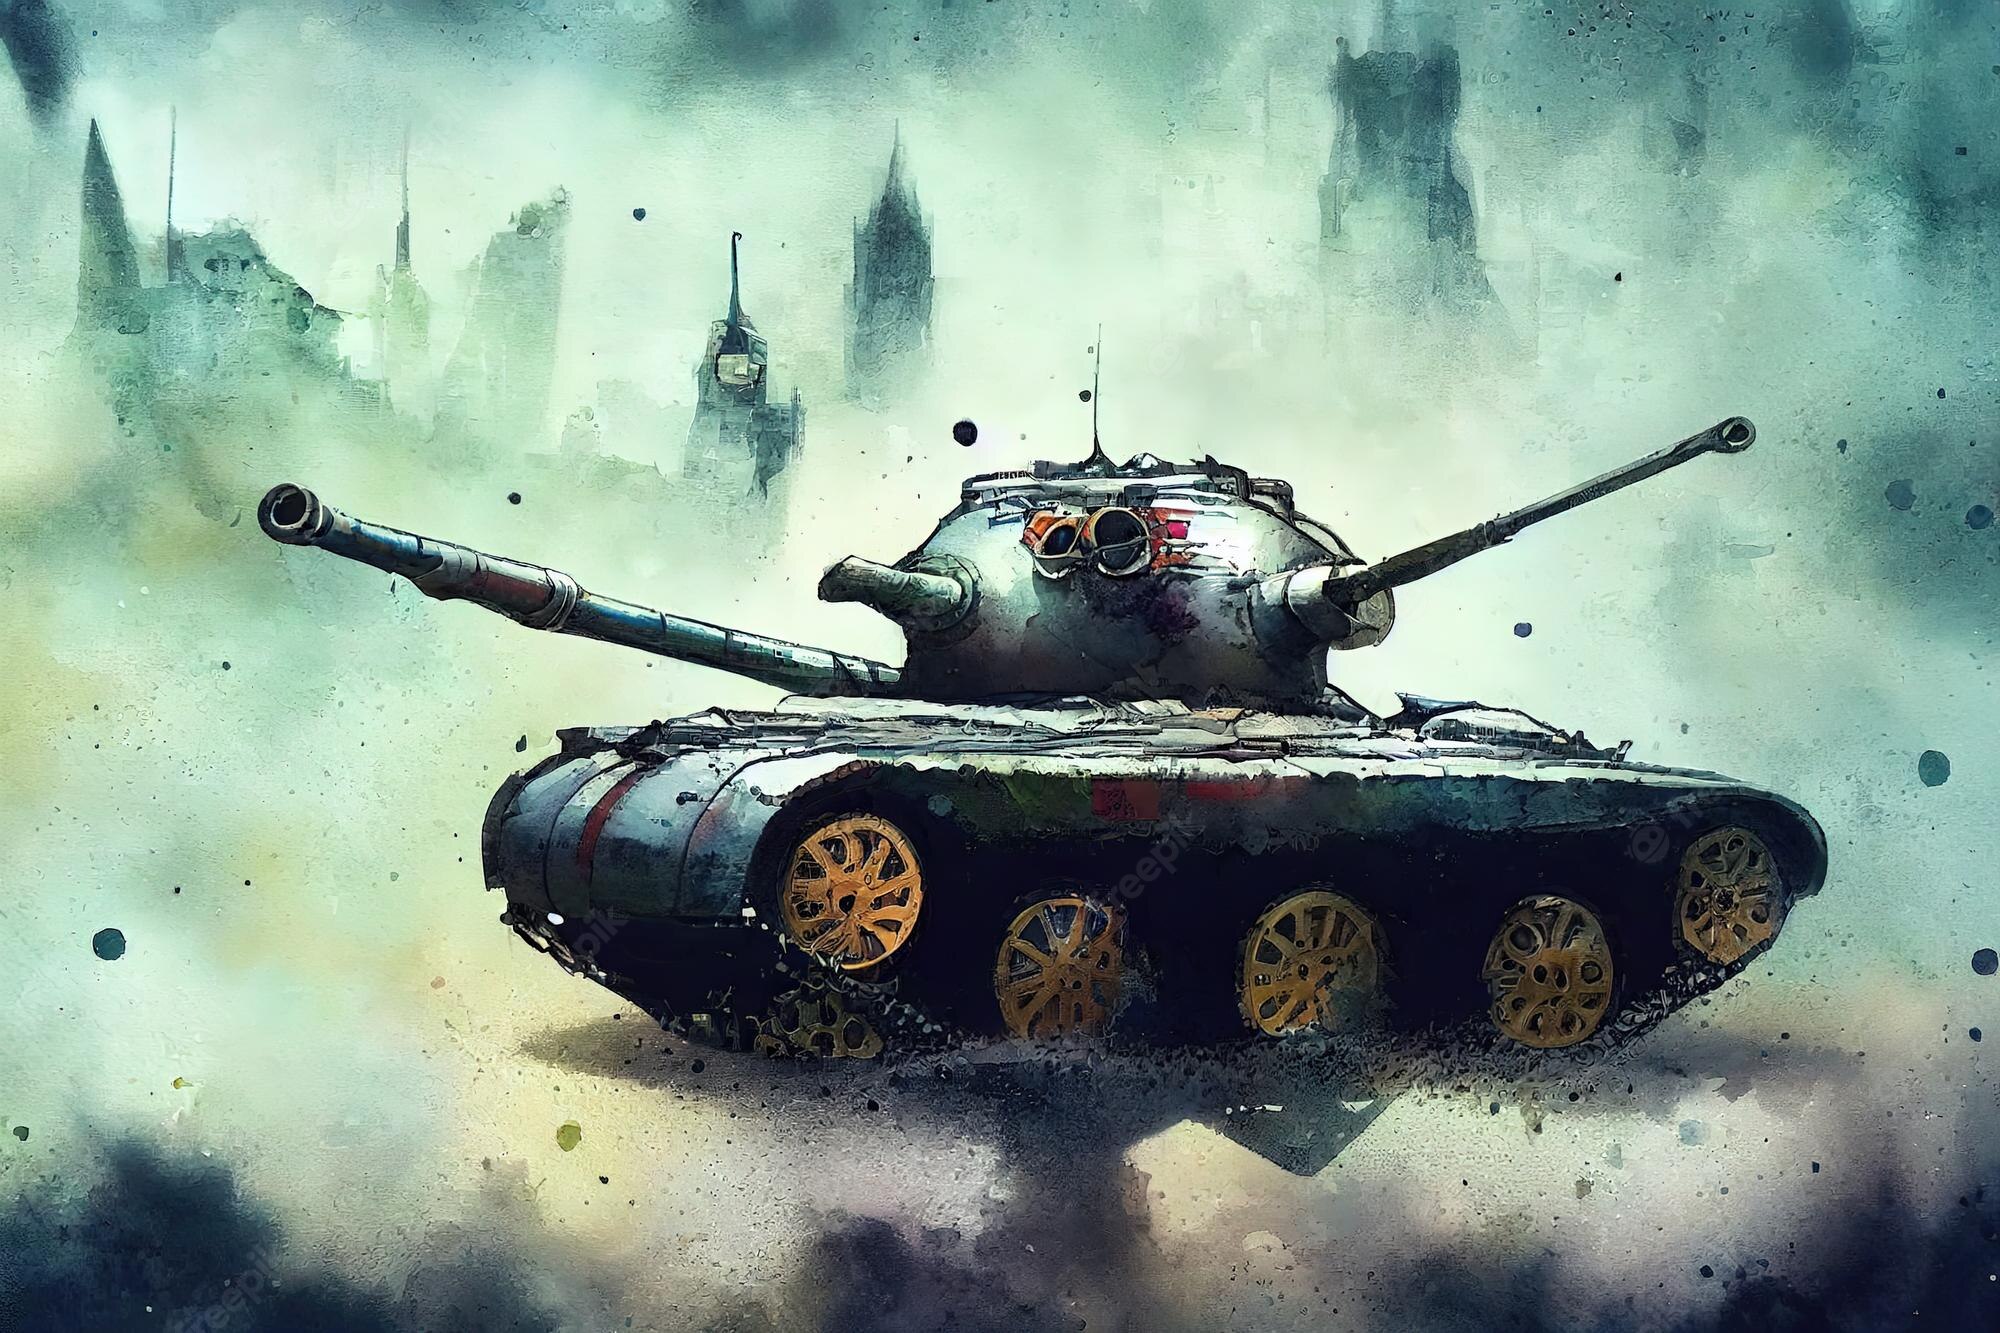 Premium Photo. Tank is in battle in watercolor style firing at the enemy world war huge tank digital art style illustration painting